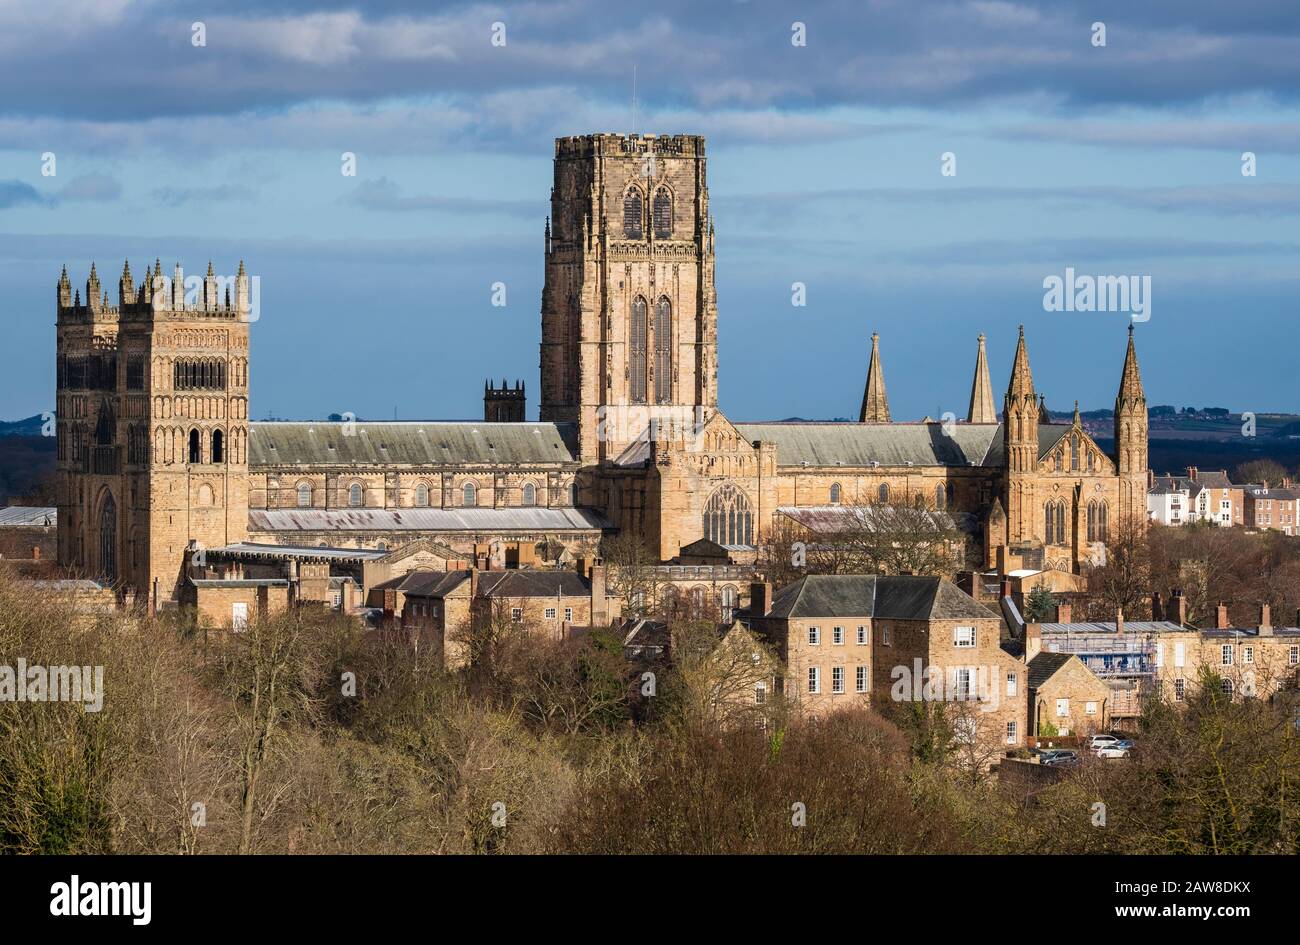 Durham Cathedral - 11th / 12th century church in North East England with Romanesque, Norman & Gothic architecture Stock Photo